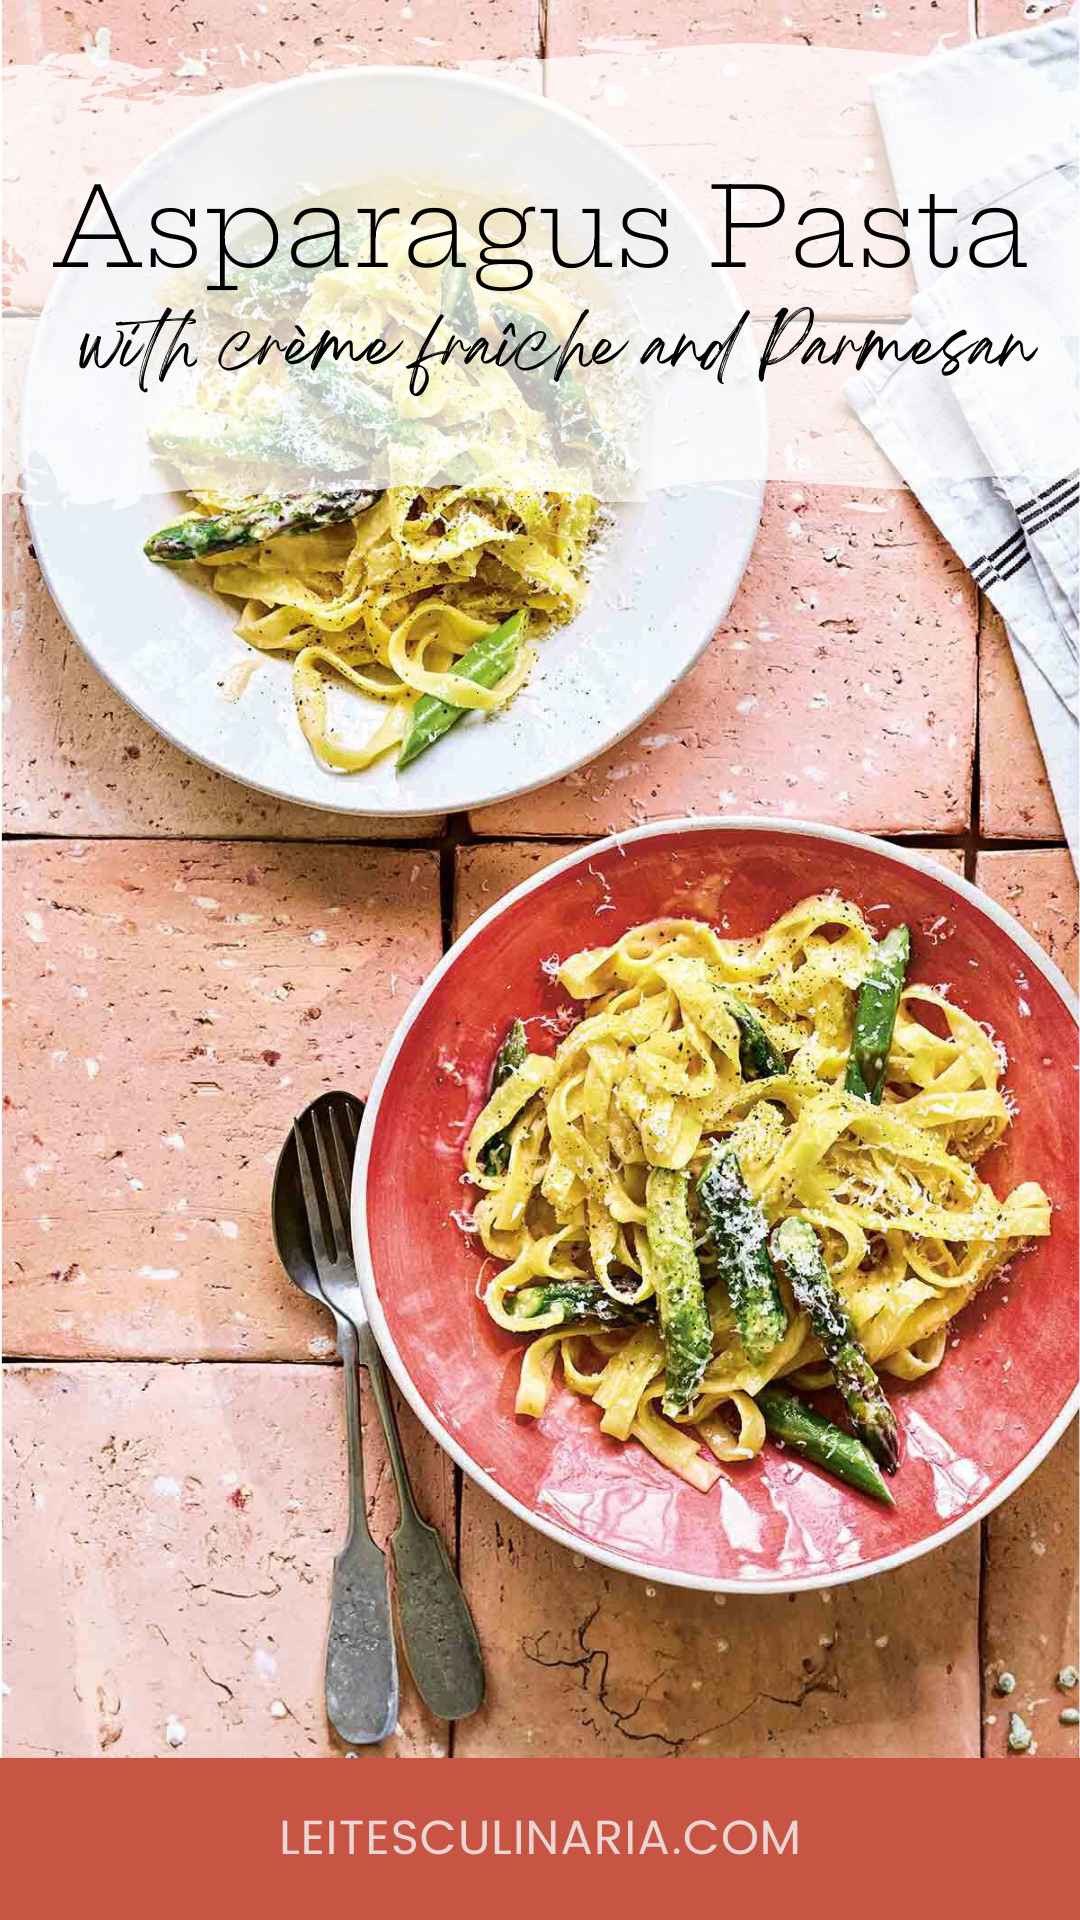 Two plates of creamy asparagus pasta topped with grated Parmesan cheese.